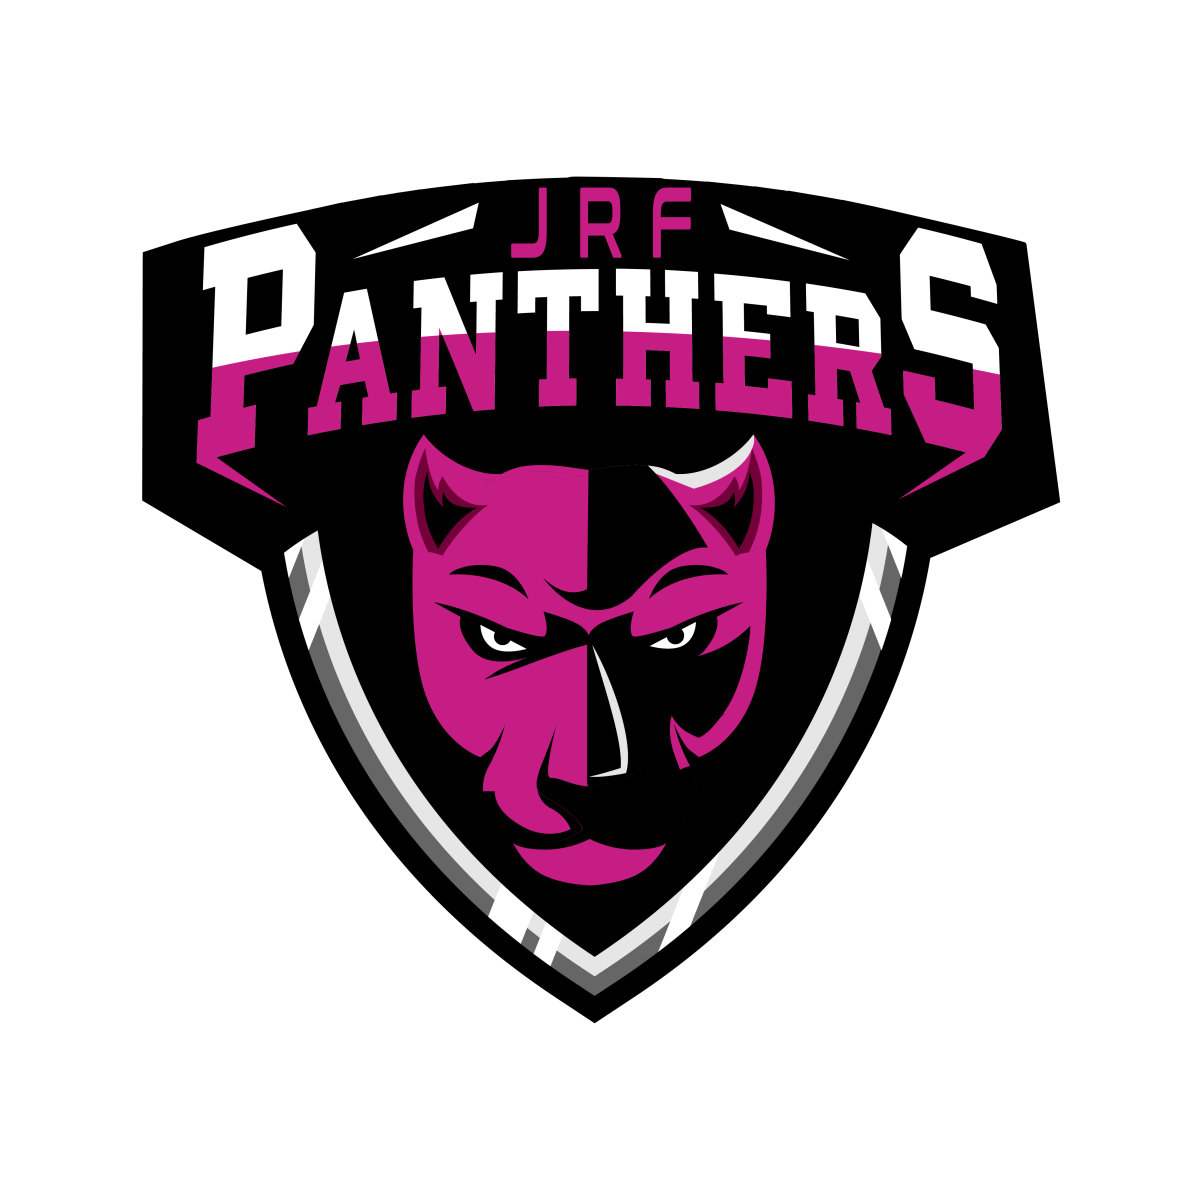 JRF Panthers Gets New Logo And More – Black and Pink Media